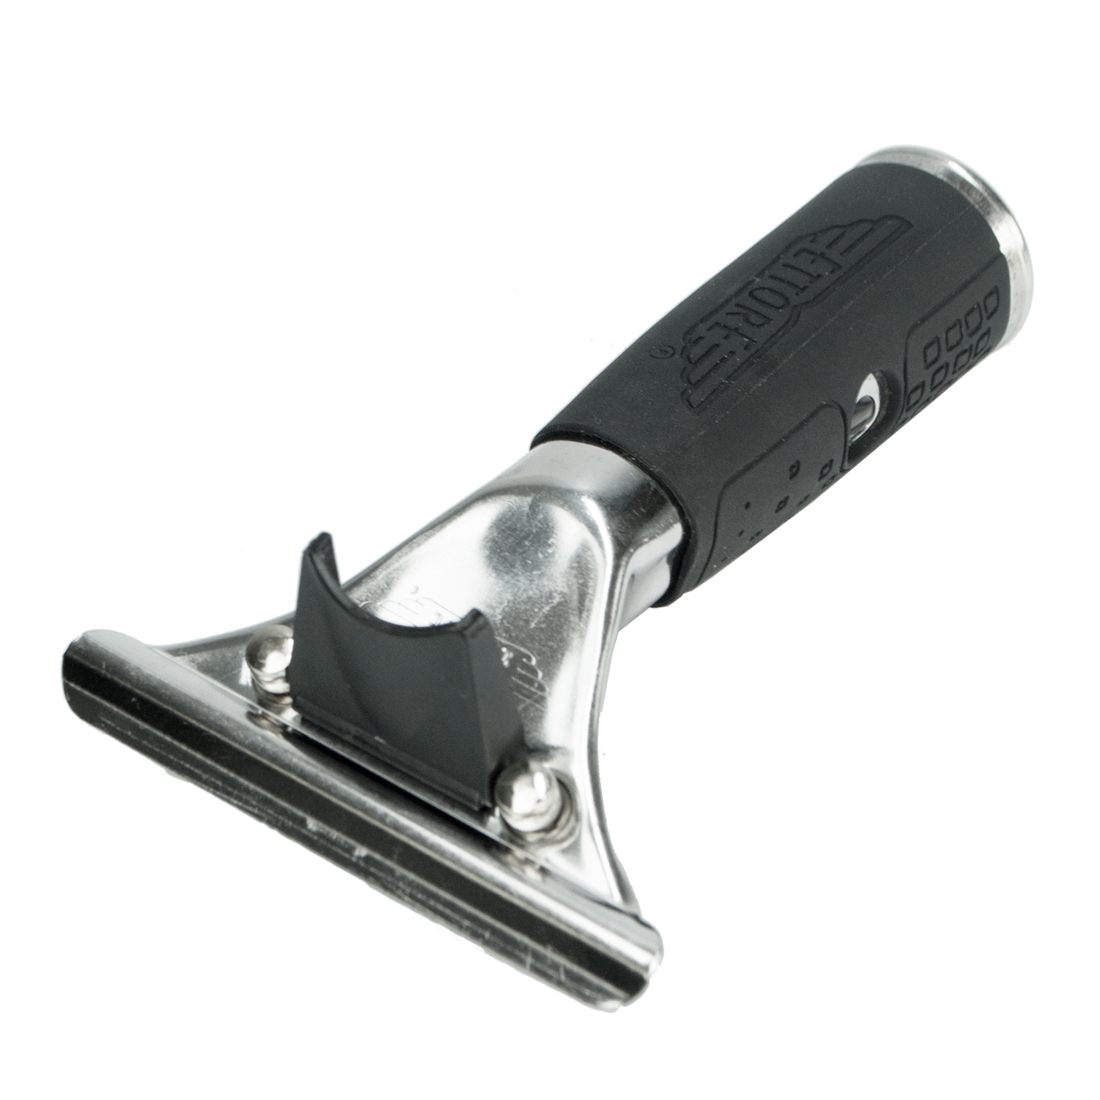 Ettore Quick Release Stainless Steel with Rubber Grip Squeegee Handle Clip Released Oblique Head View